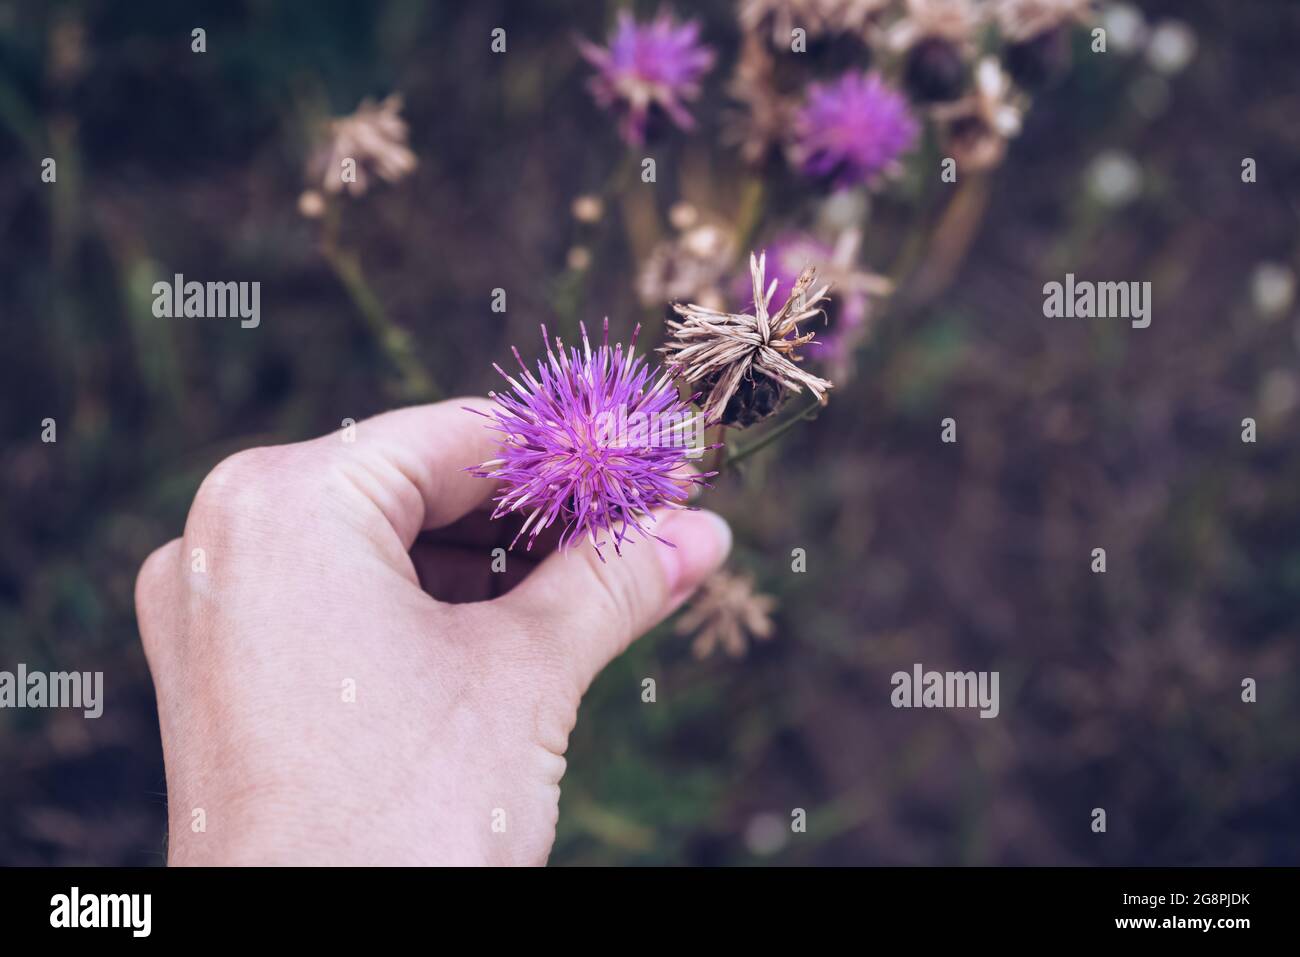 brown knapweed blooming flower in woman's hand  close up view Stock Photo